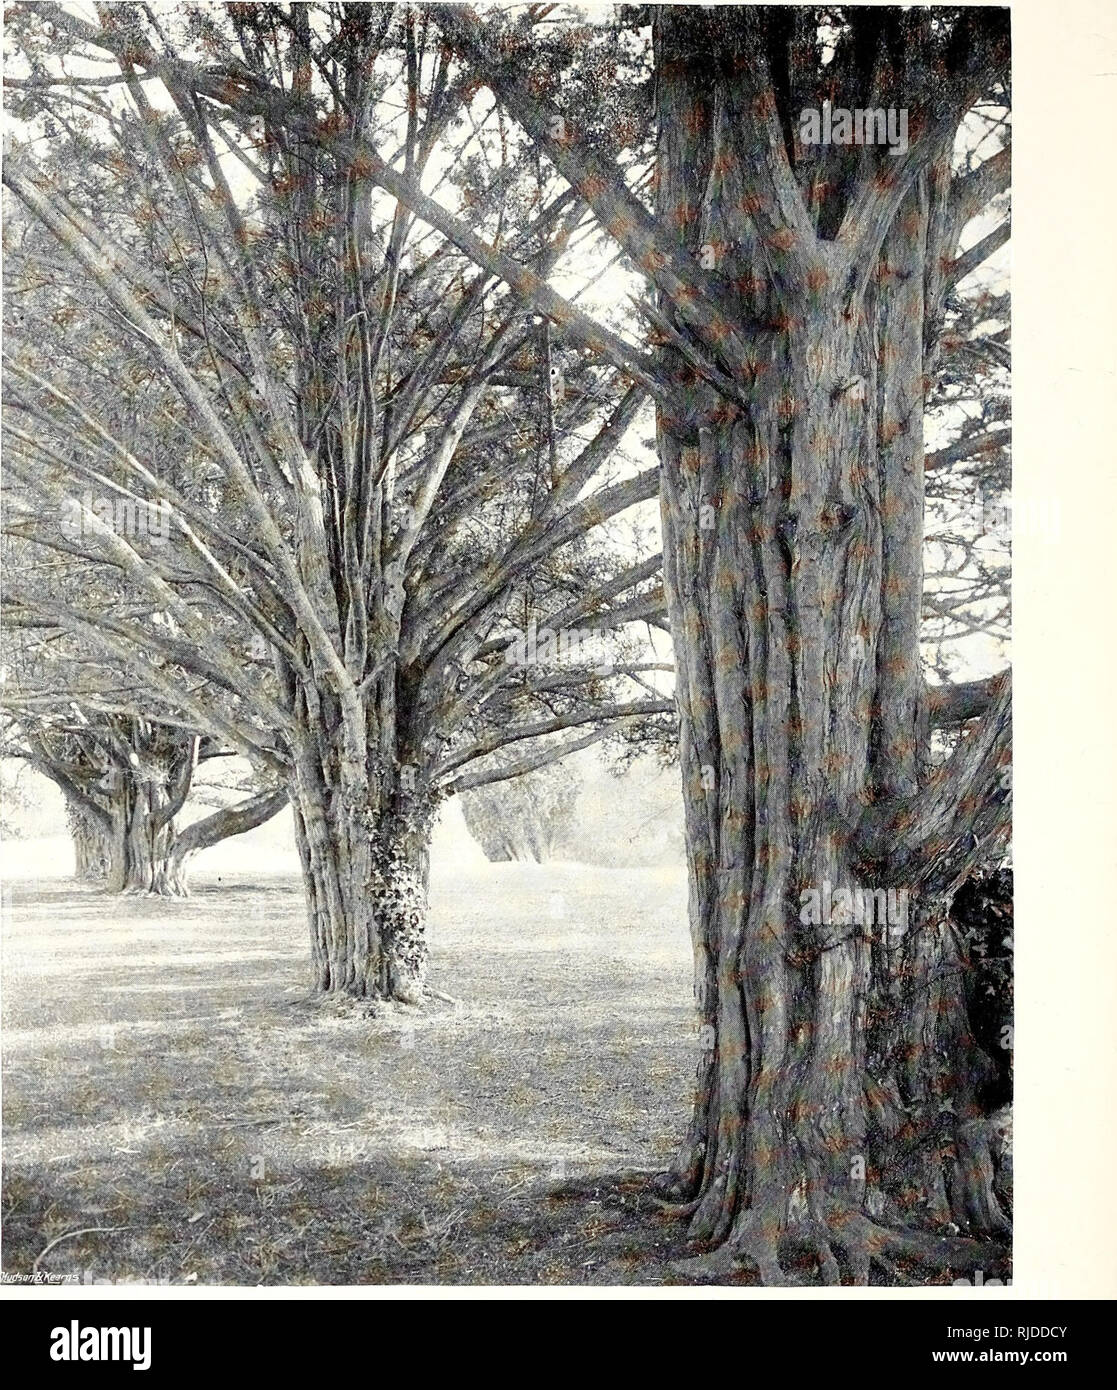 . The century book of gardening; a comprehensive work for every lover of the garden. Gardening. f 4SO 1. A STUDY OF YEWS AT HOLME LACY, HEREFORDSHIRE. variety Iutea has deep yellow foliage, while in Vervseneana it is of a bronzy orange hue. A weeping form (pendula) is also very noticeable. A. Thuja, called Warreana, is considered the hardiest of the Arborvilre group. T. orientalis (the Chinese- Arborvitce).—Tas is a common plant in gardens, usually of columnar habit, and dense in growth. It is seldom seen much over 15ft. in height. There are man)' varieties, the best being aurea (the Golden A Stock Photo